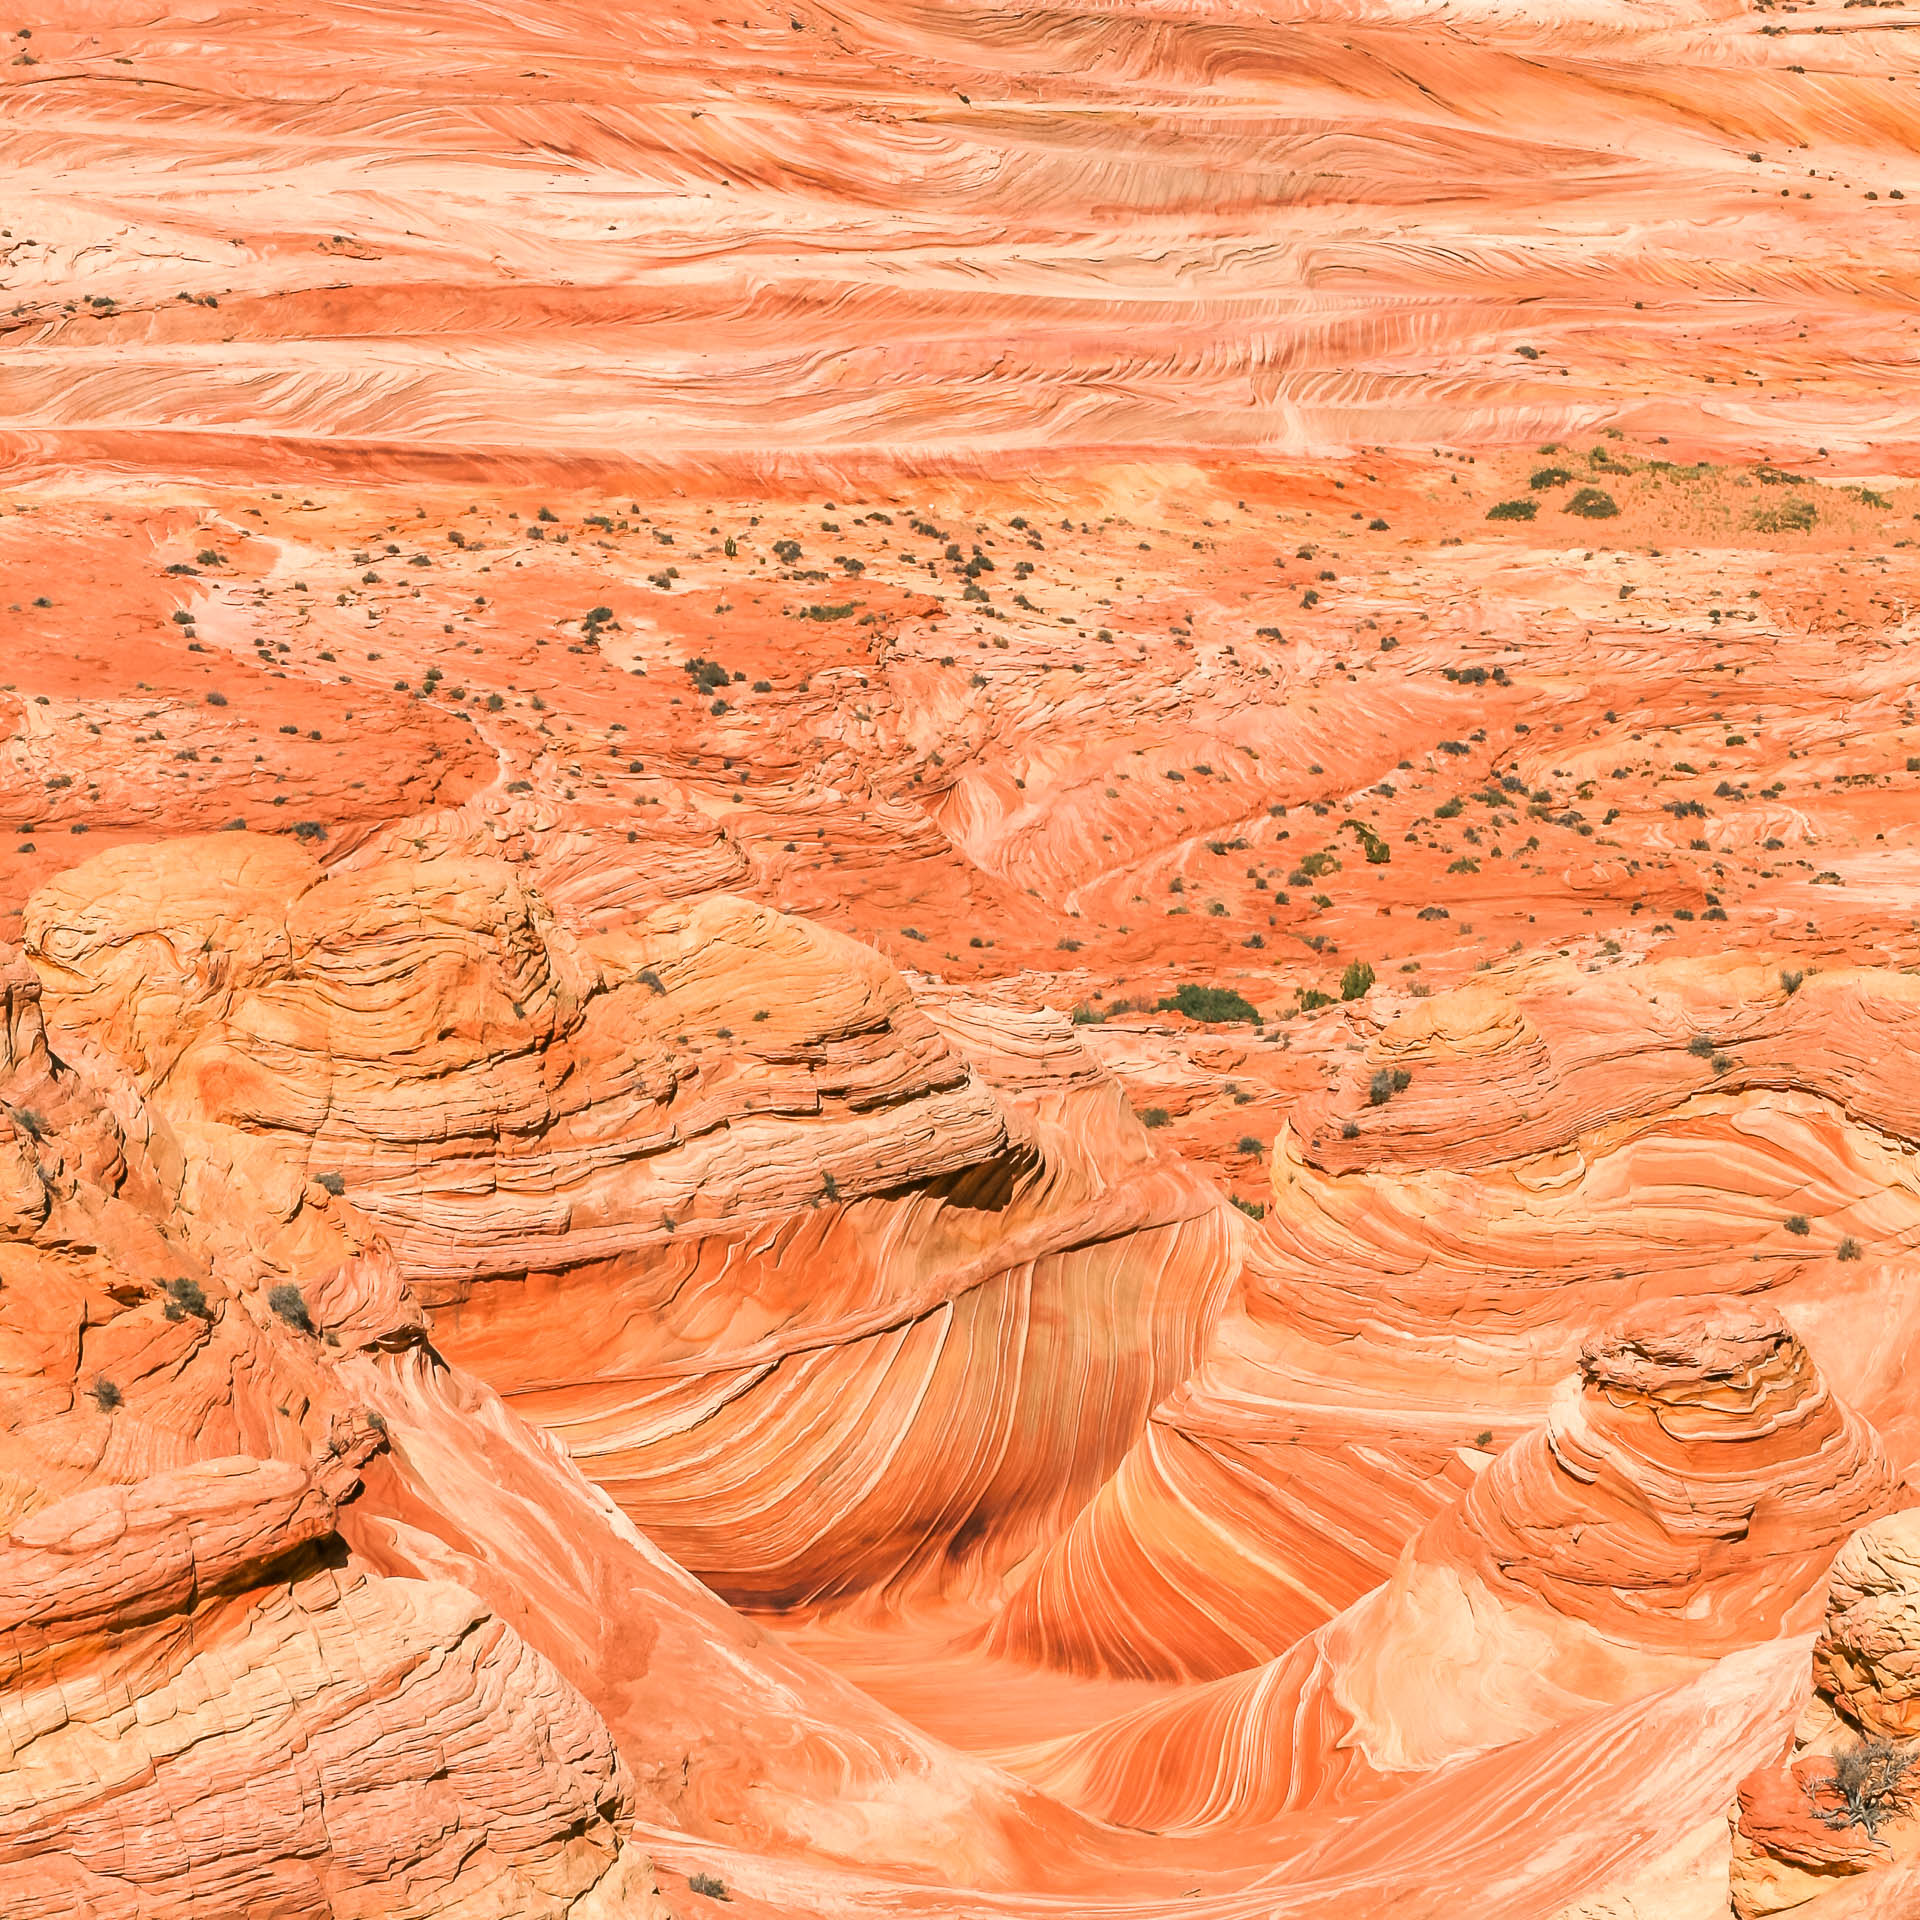 The convoluted fossilized dunes of North Coyote Buttes